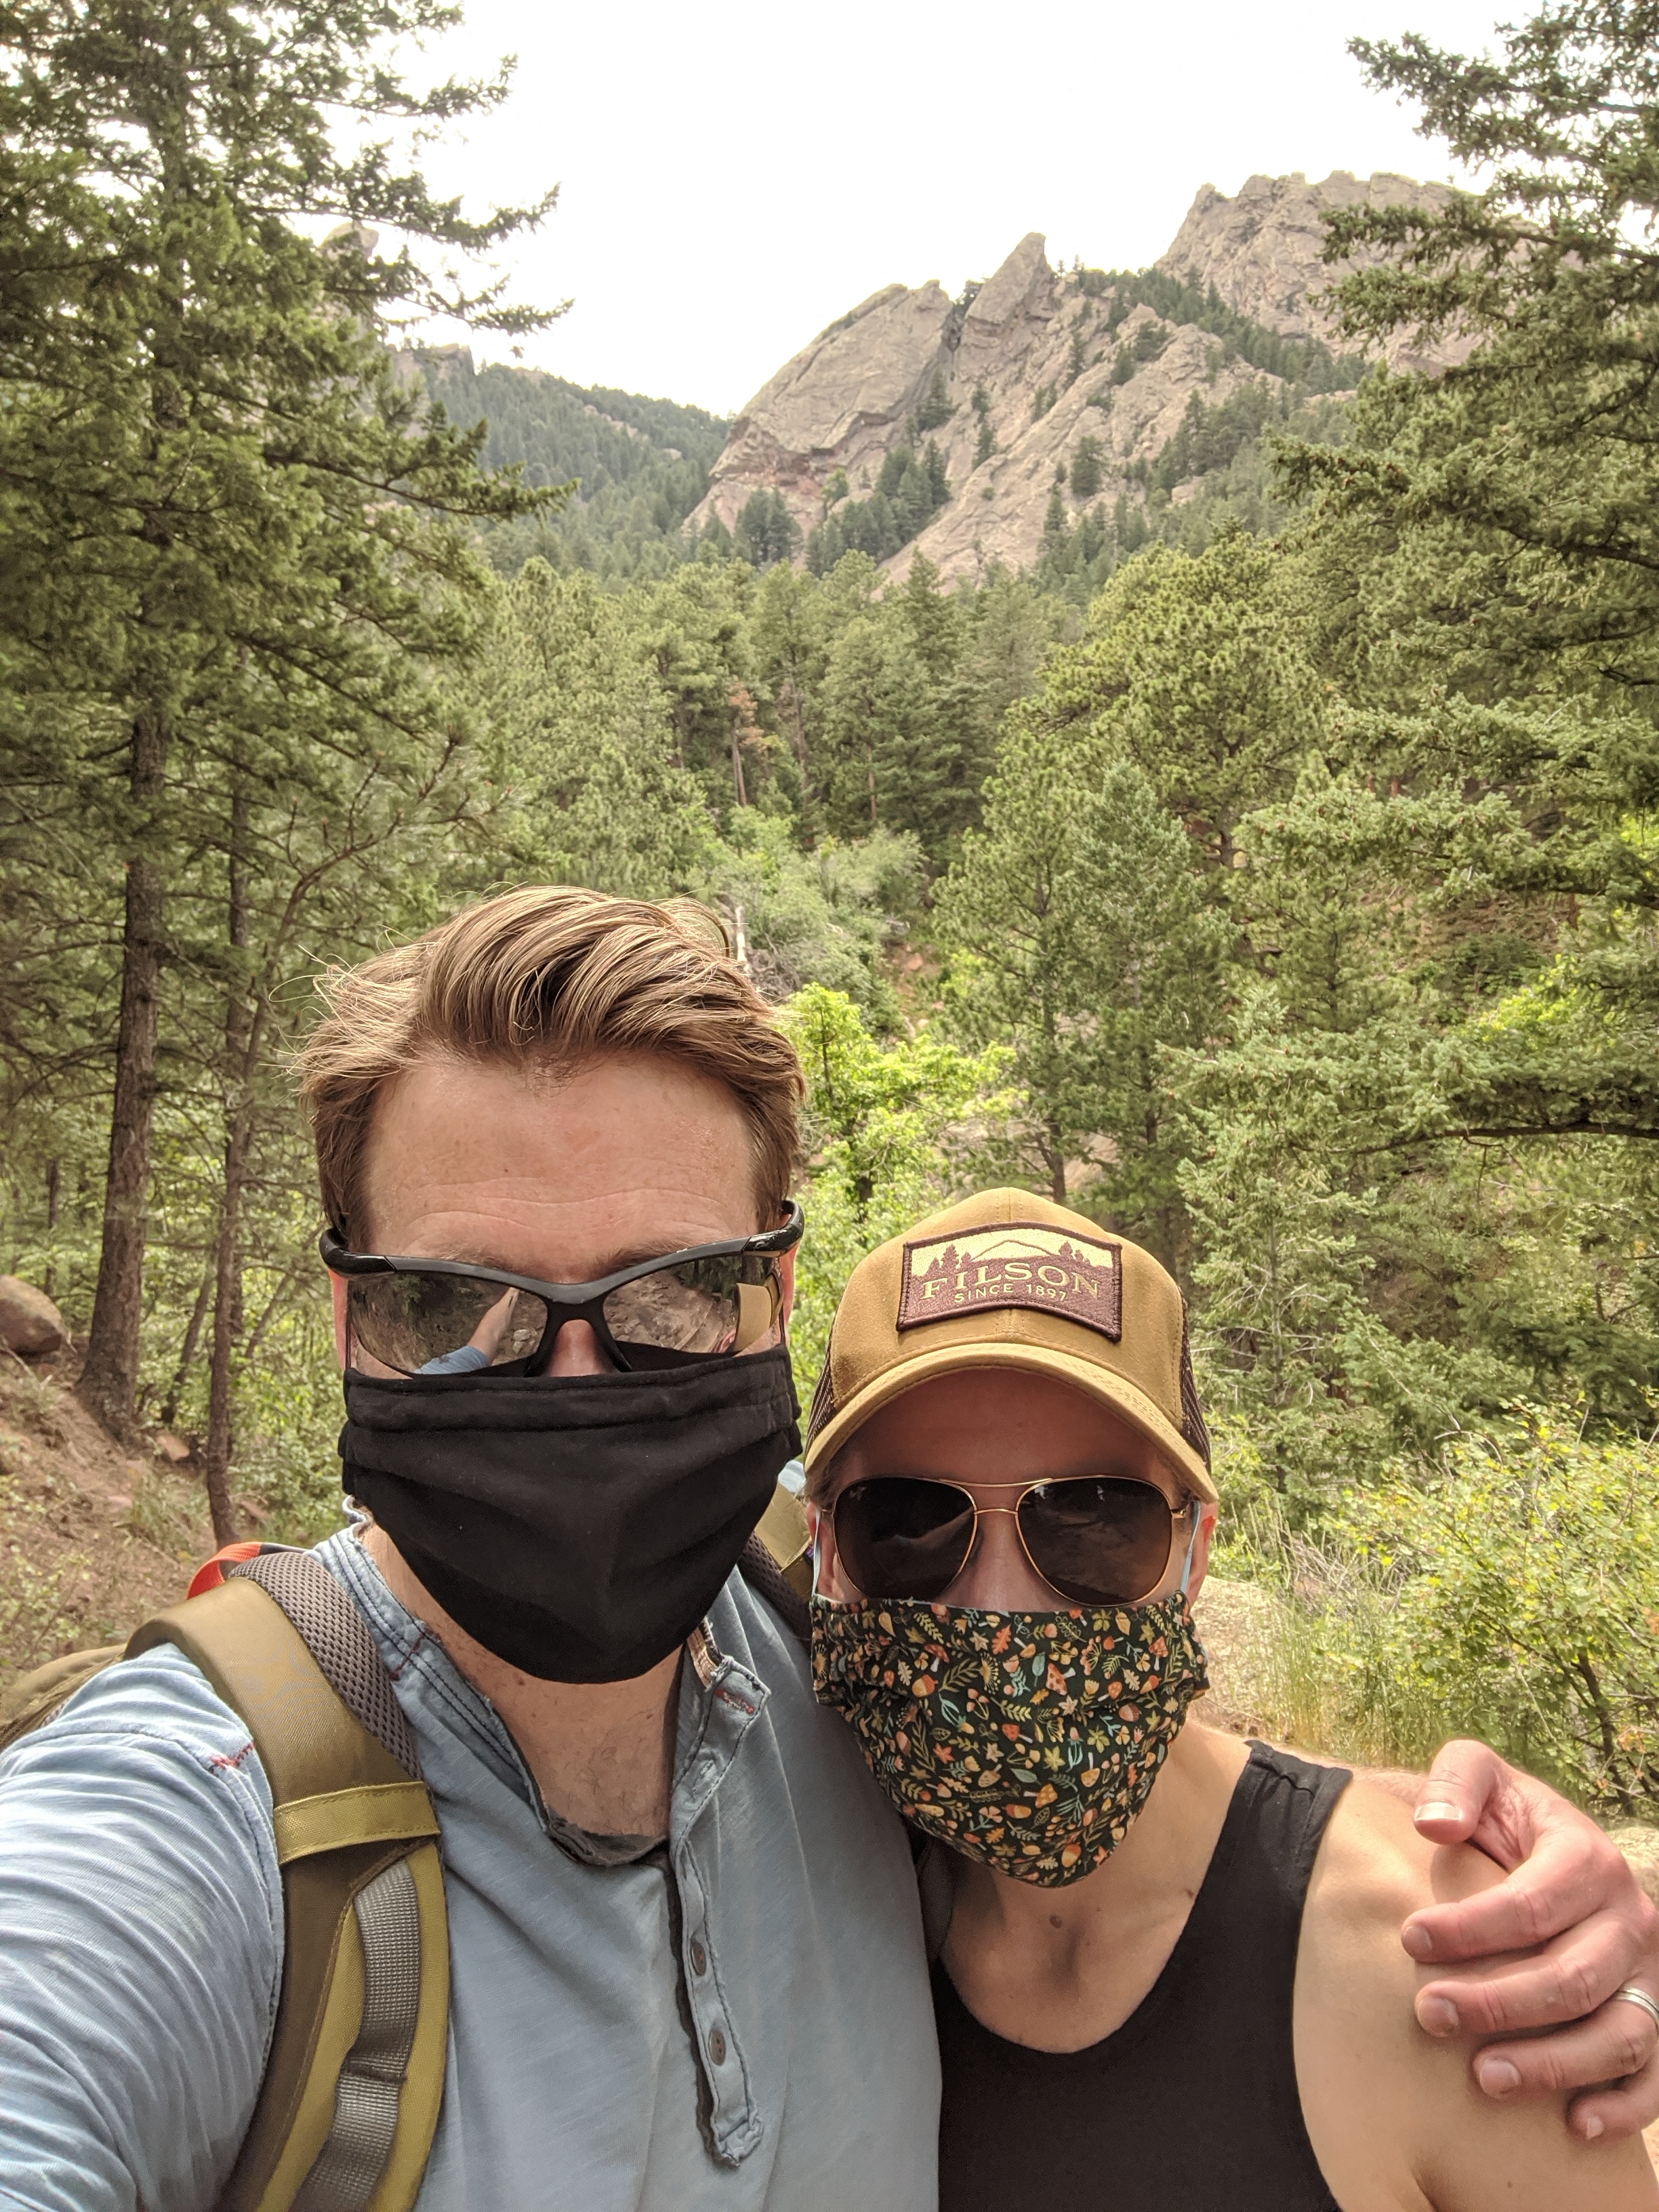 Katie and Jeff on a hike on their anniversary.